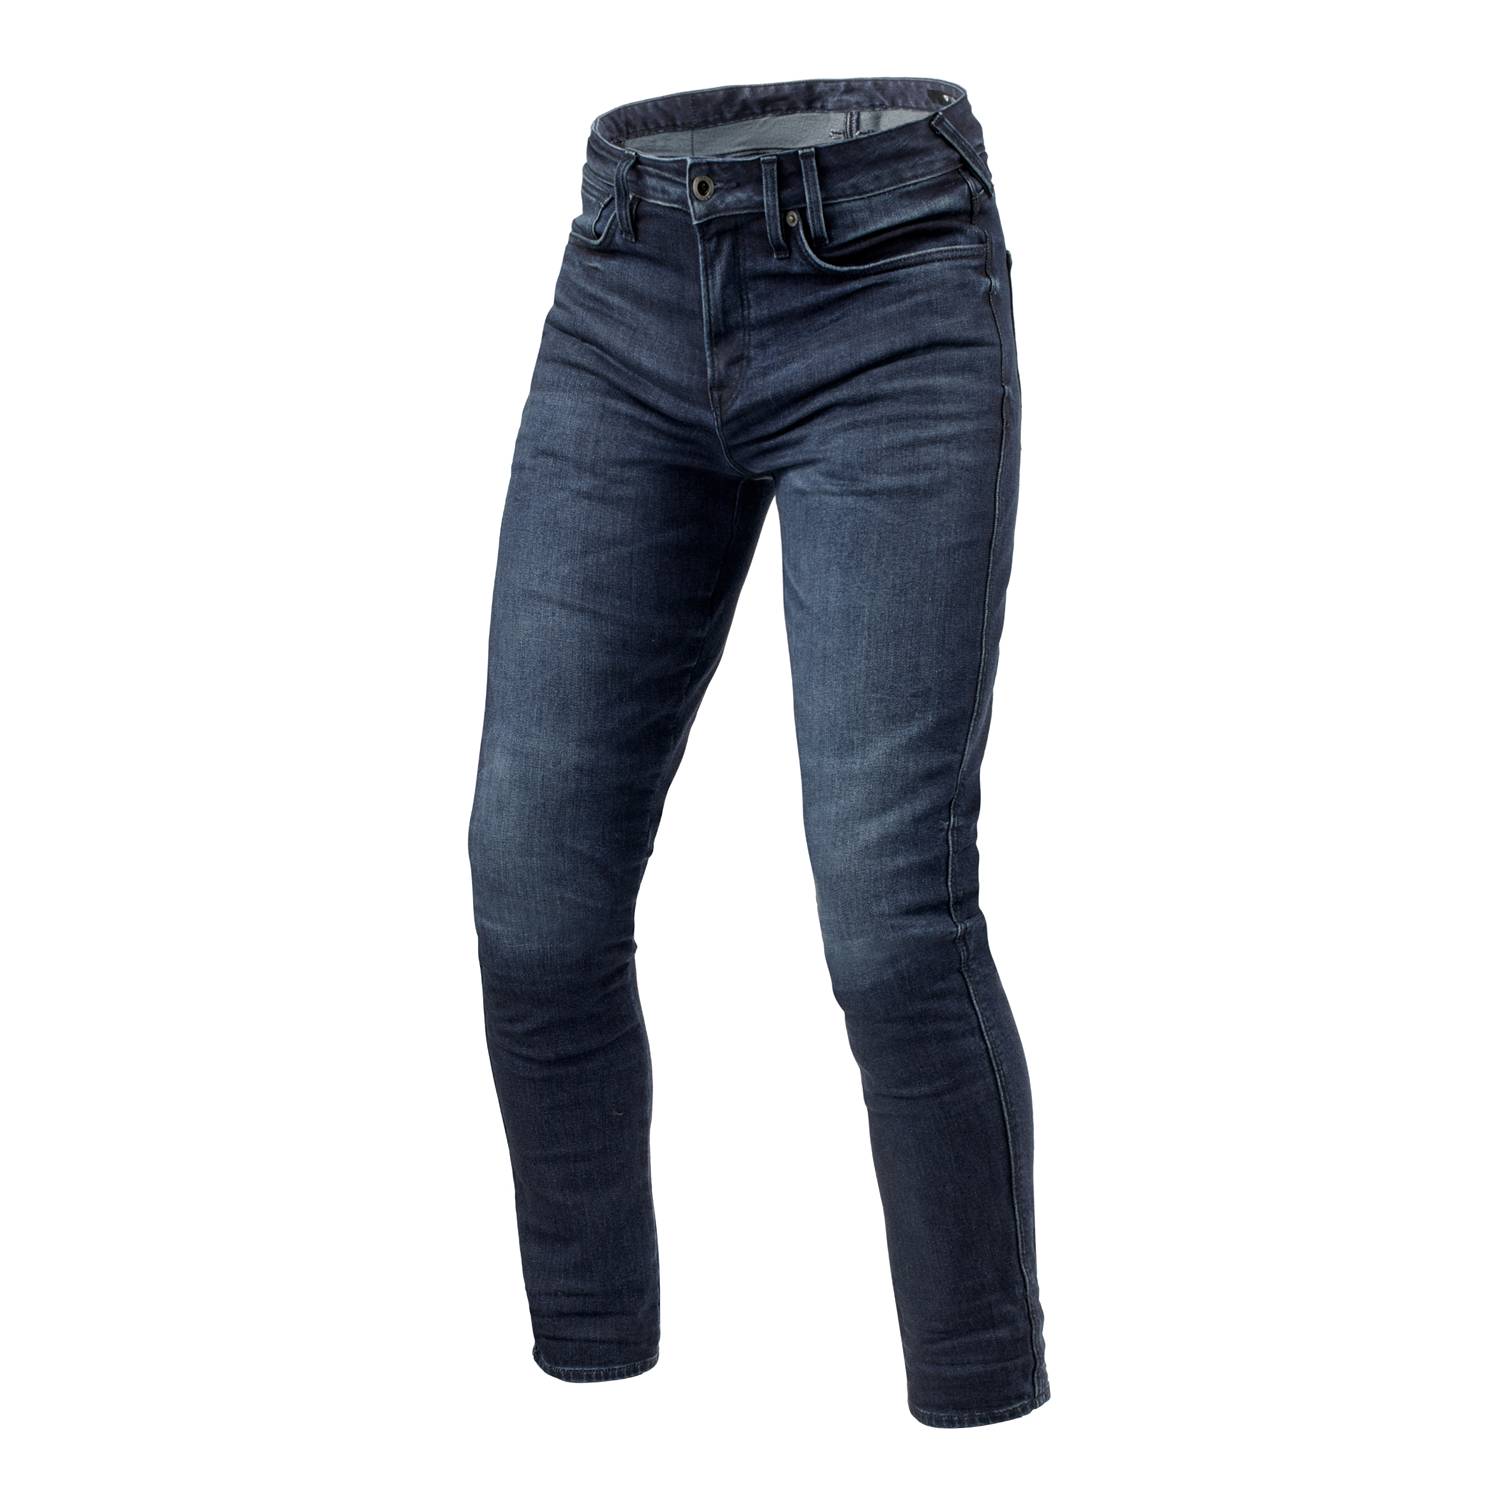 Image of REV'IT! Jeans Carlin SK Dark Blue Used L36 Motorcycle Jeans Size L36/W30 ID 8700001376525